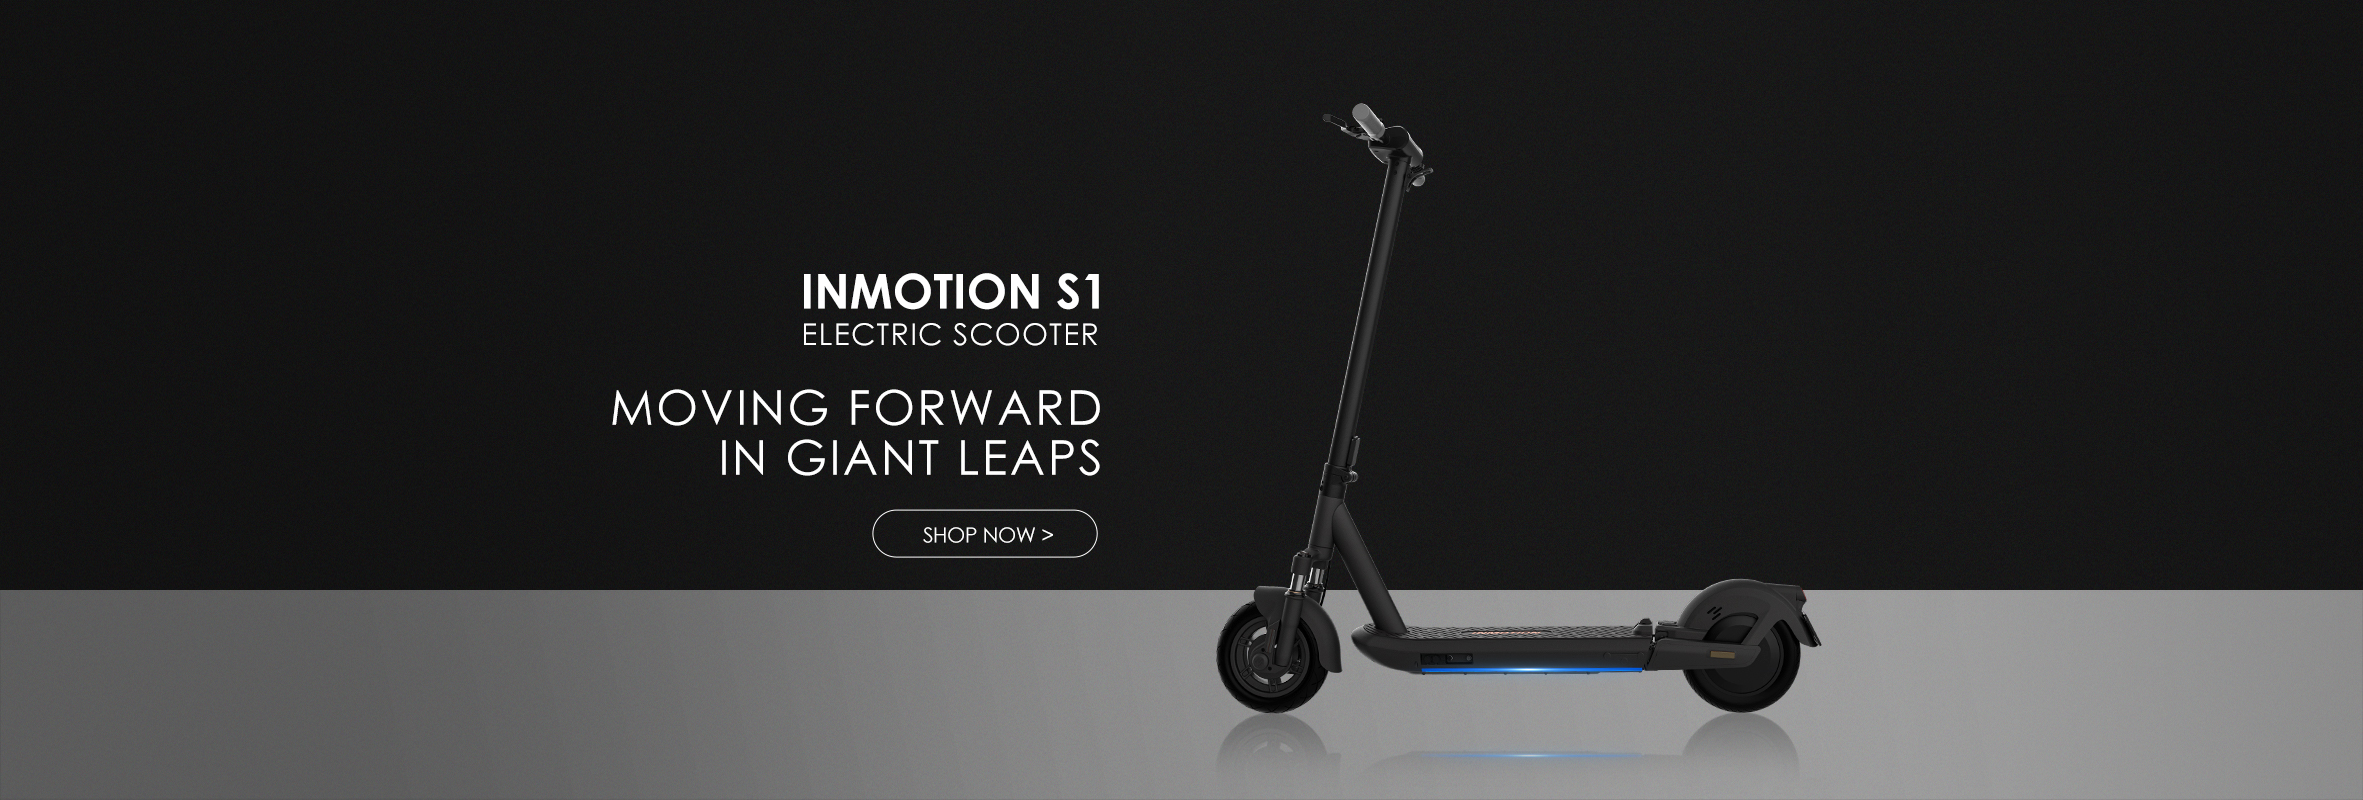 Inmotion S1 Electric Scooter